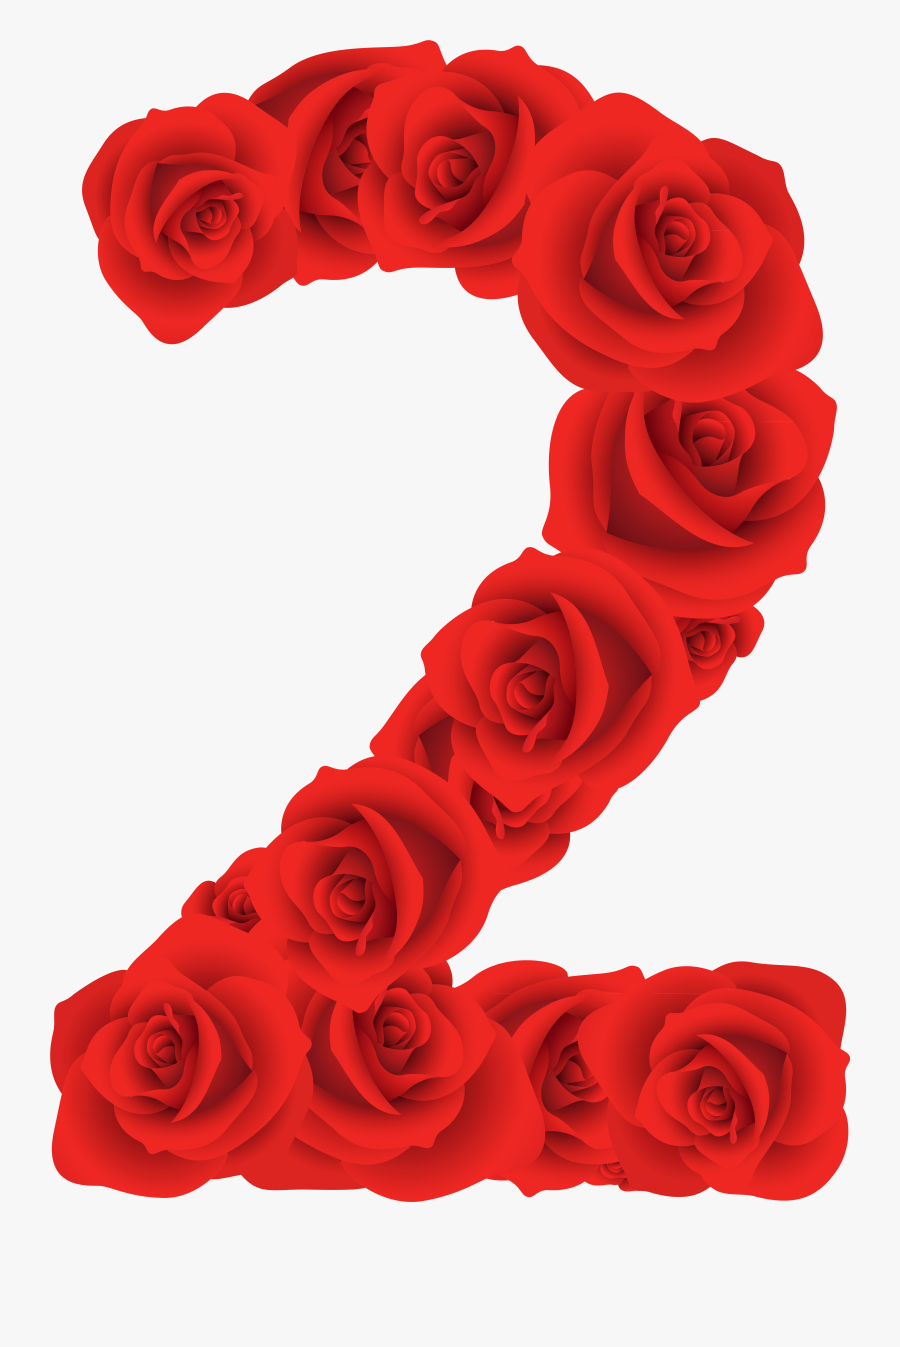 Red Roses Number Two Png Clipart Image - Numero 2 Con Rosas, Transparent Clipart